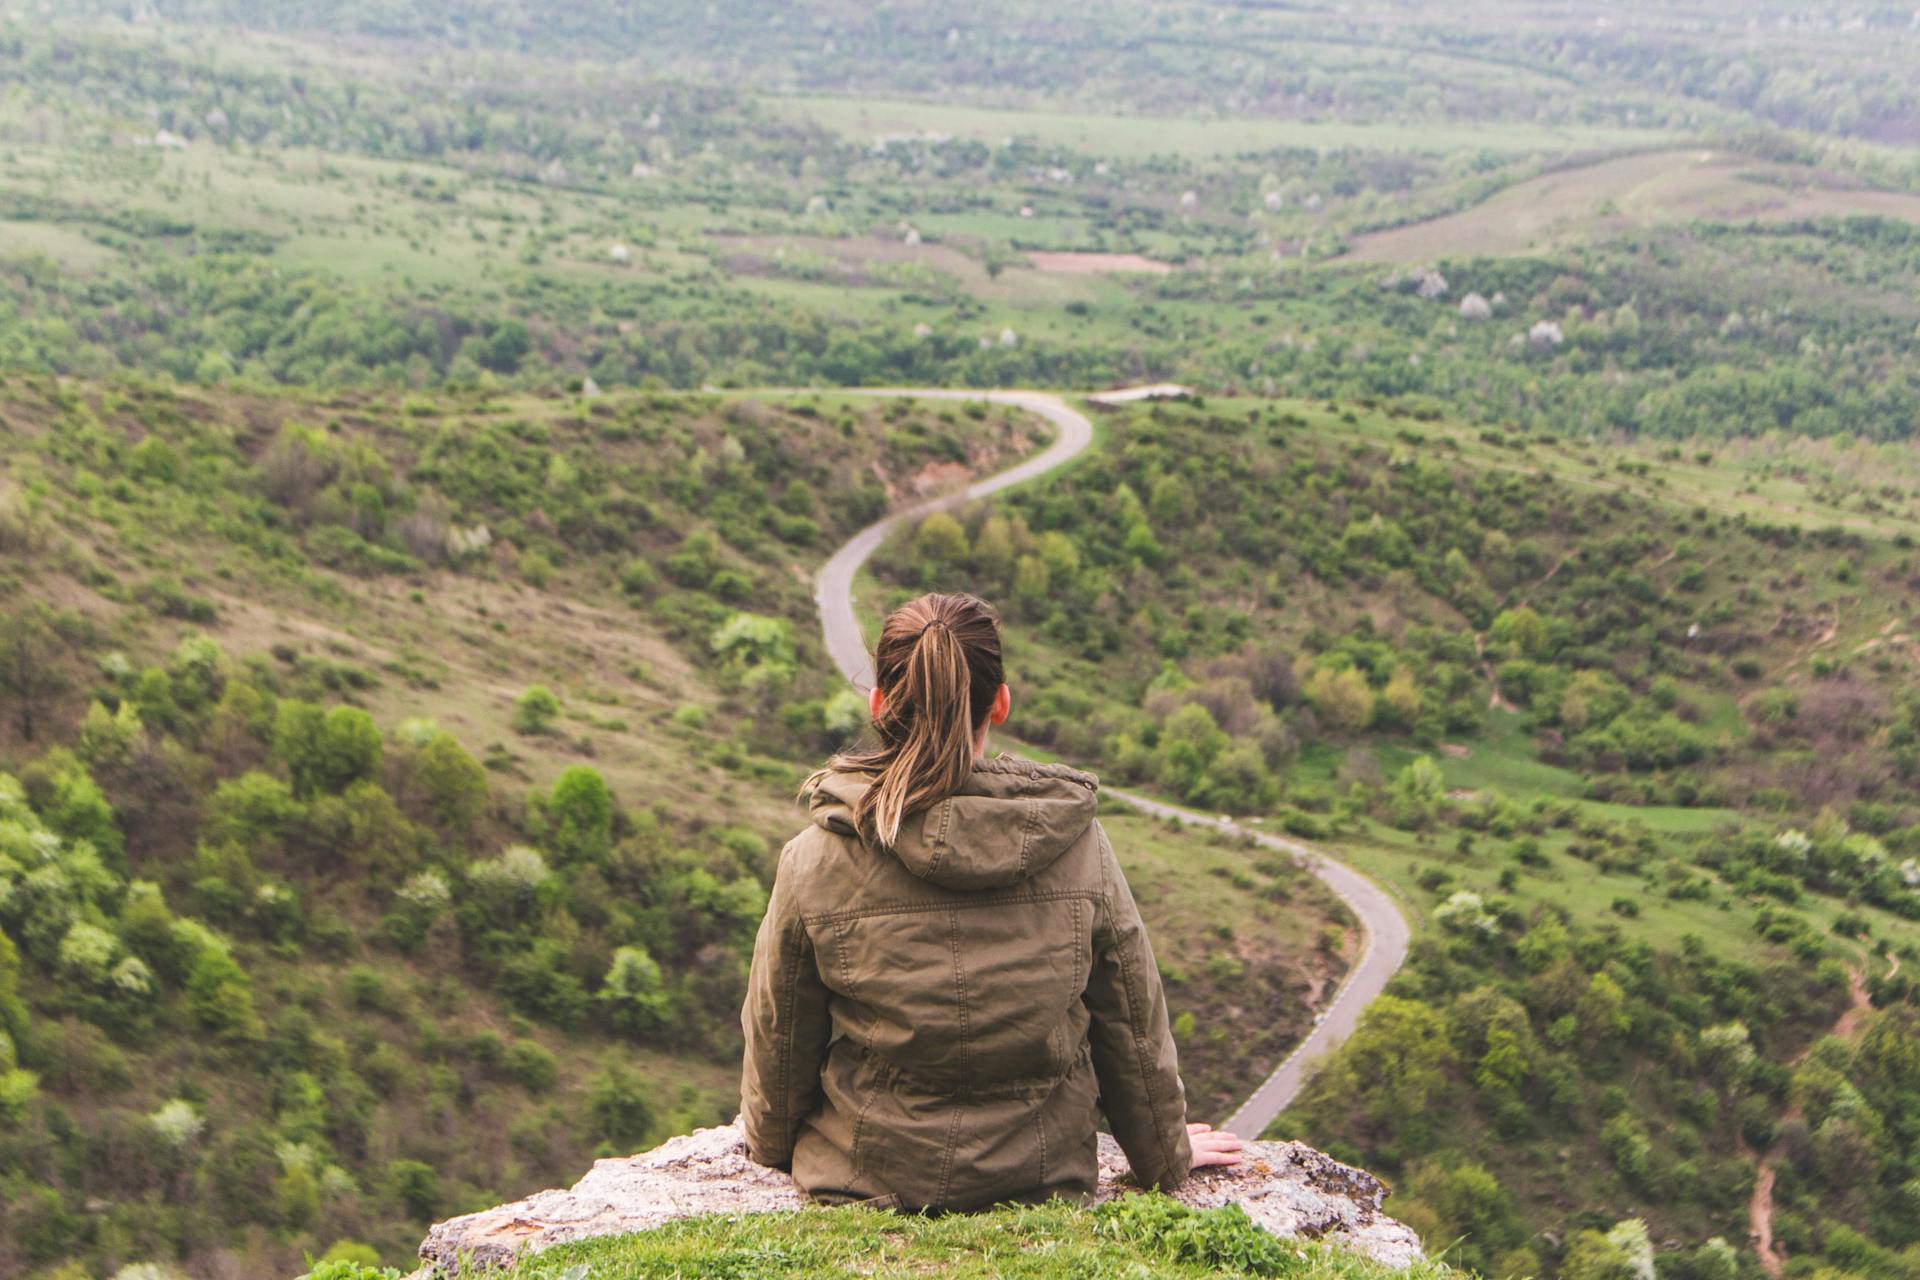 Young woman looking out over winding road. Understanding your customer journey is crucial to successful marketing strategy.